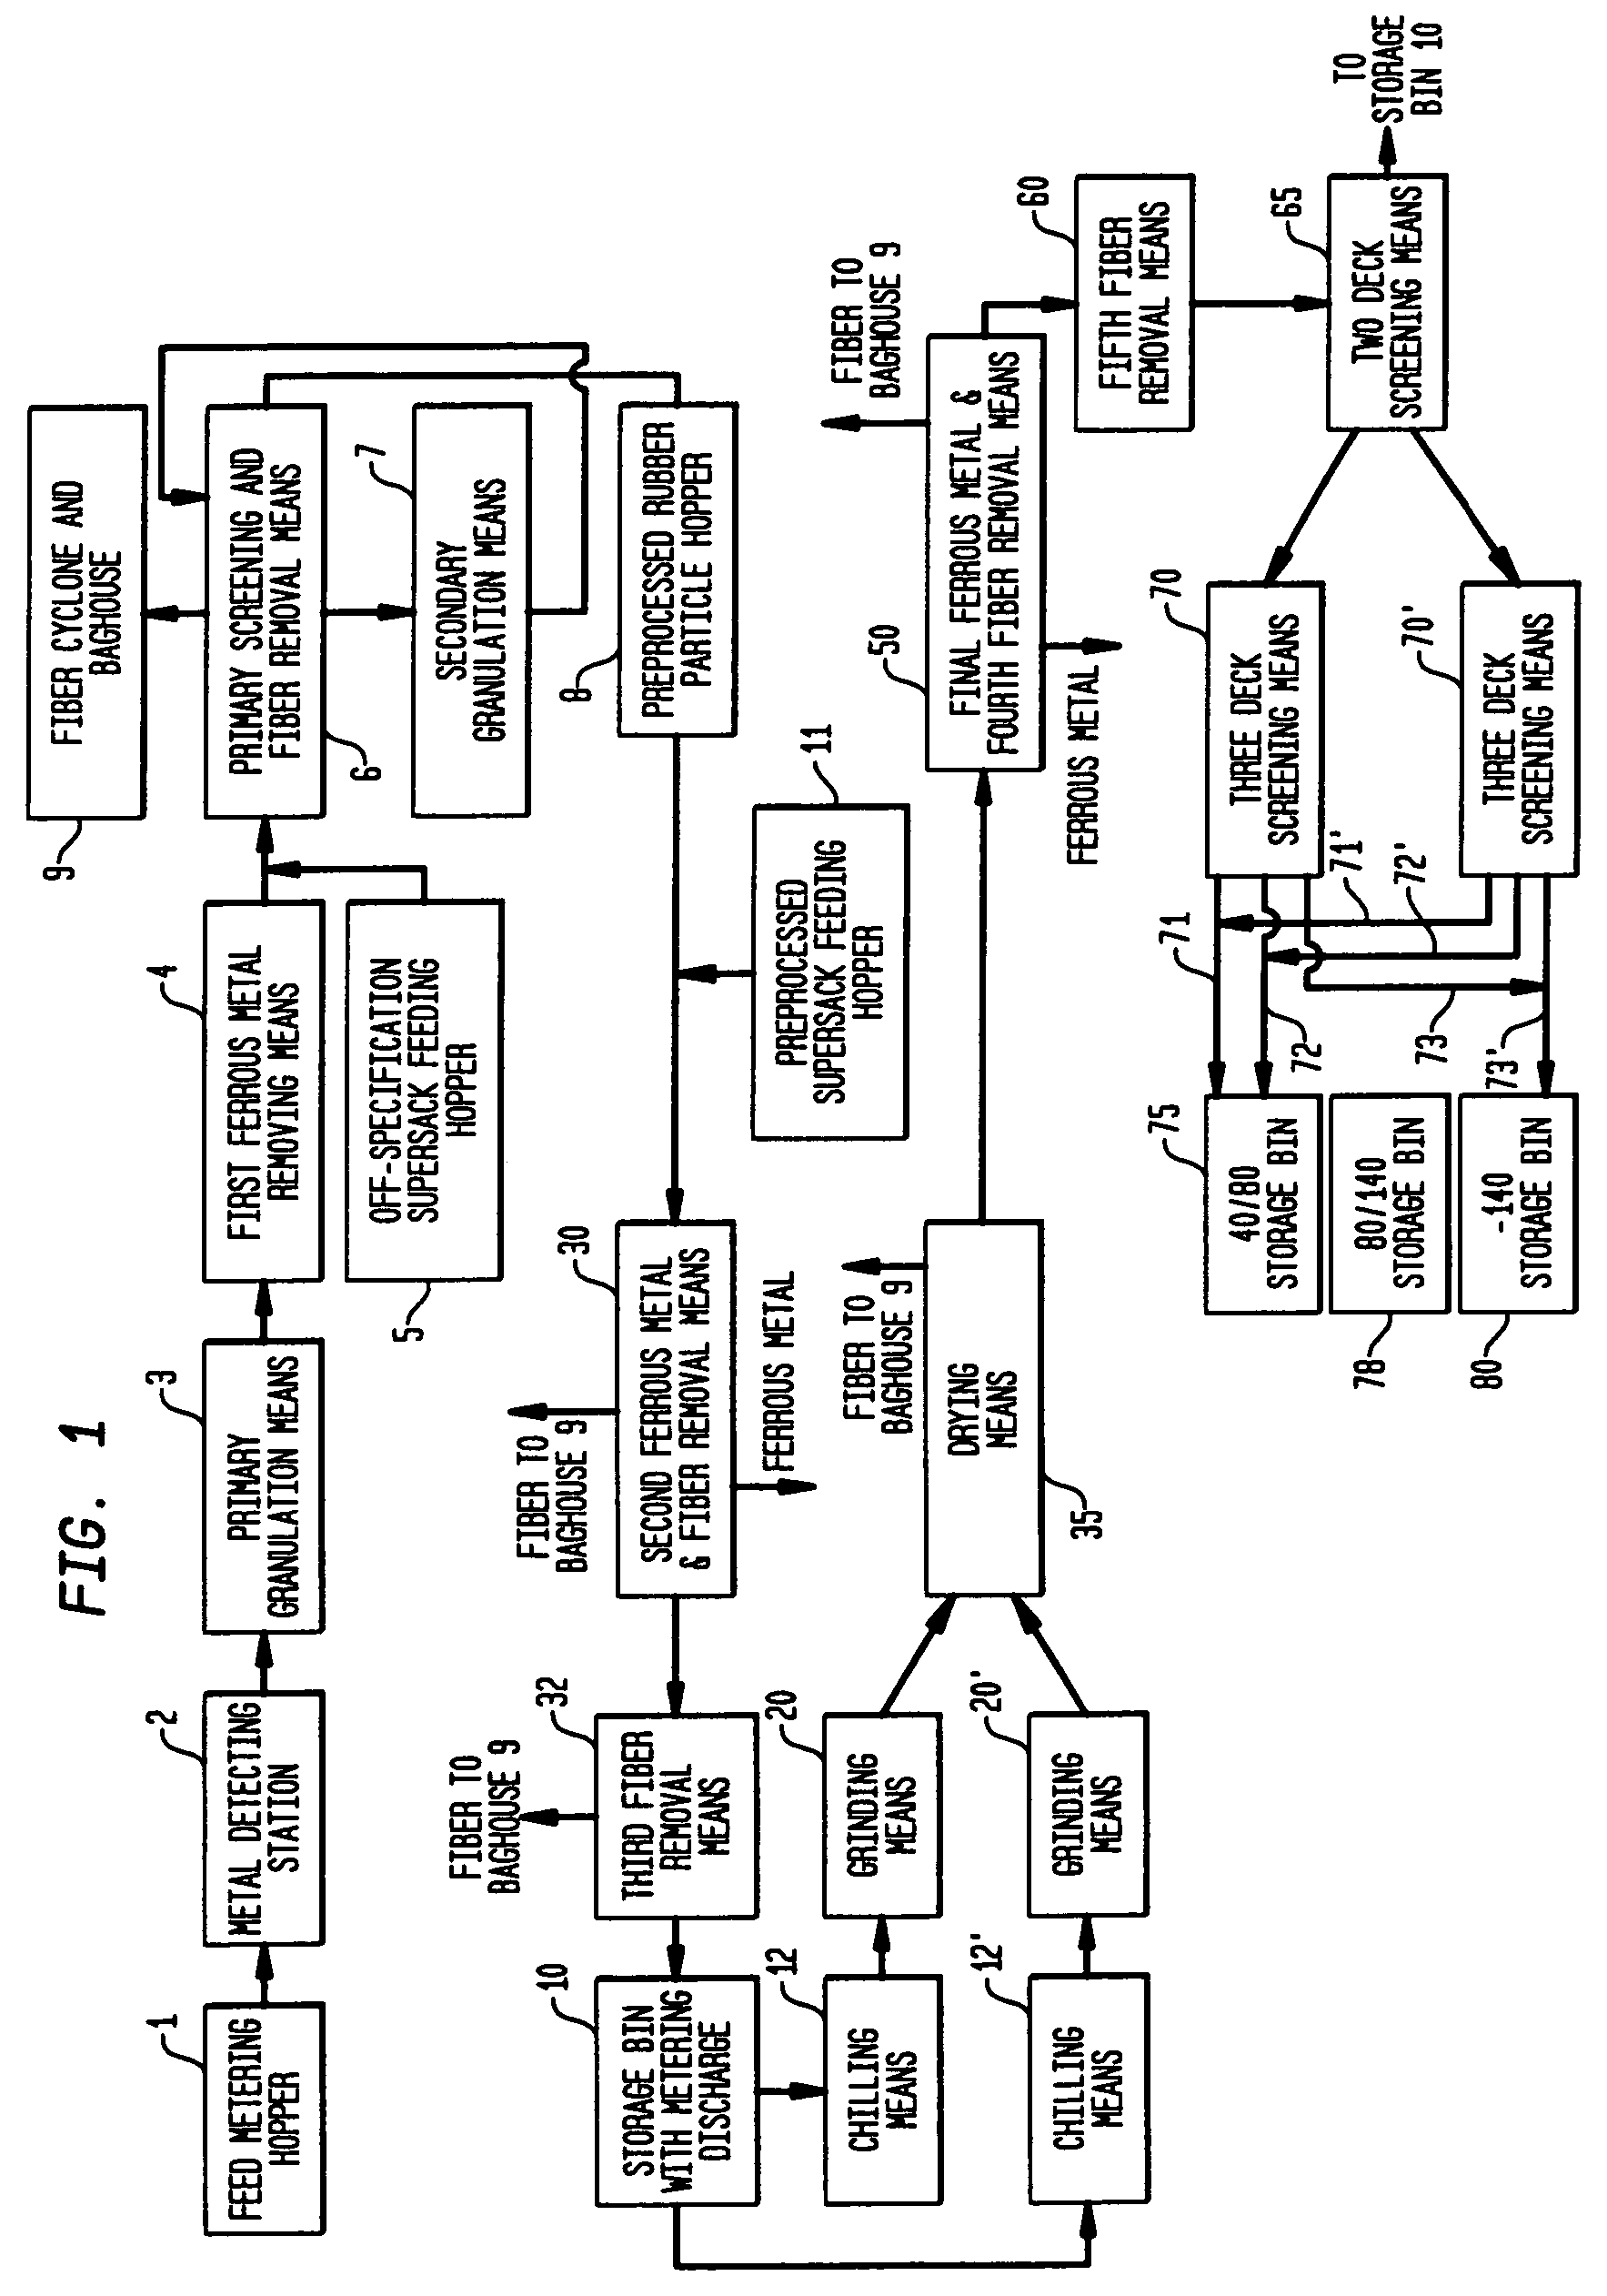 Process and apparatus for manufacturing crumb and powder rubber